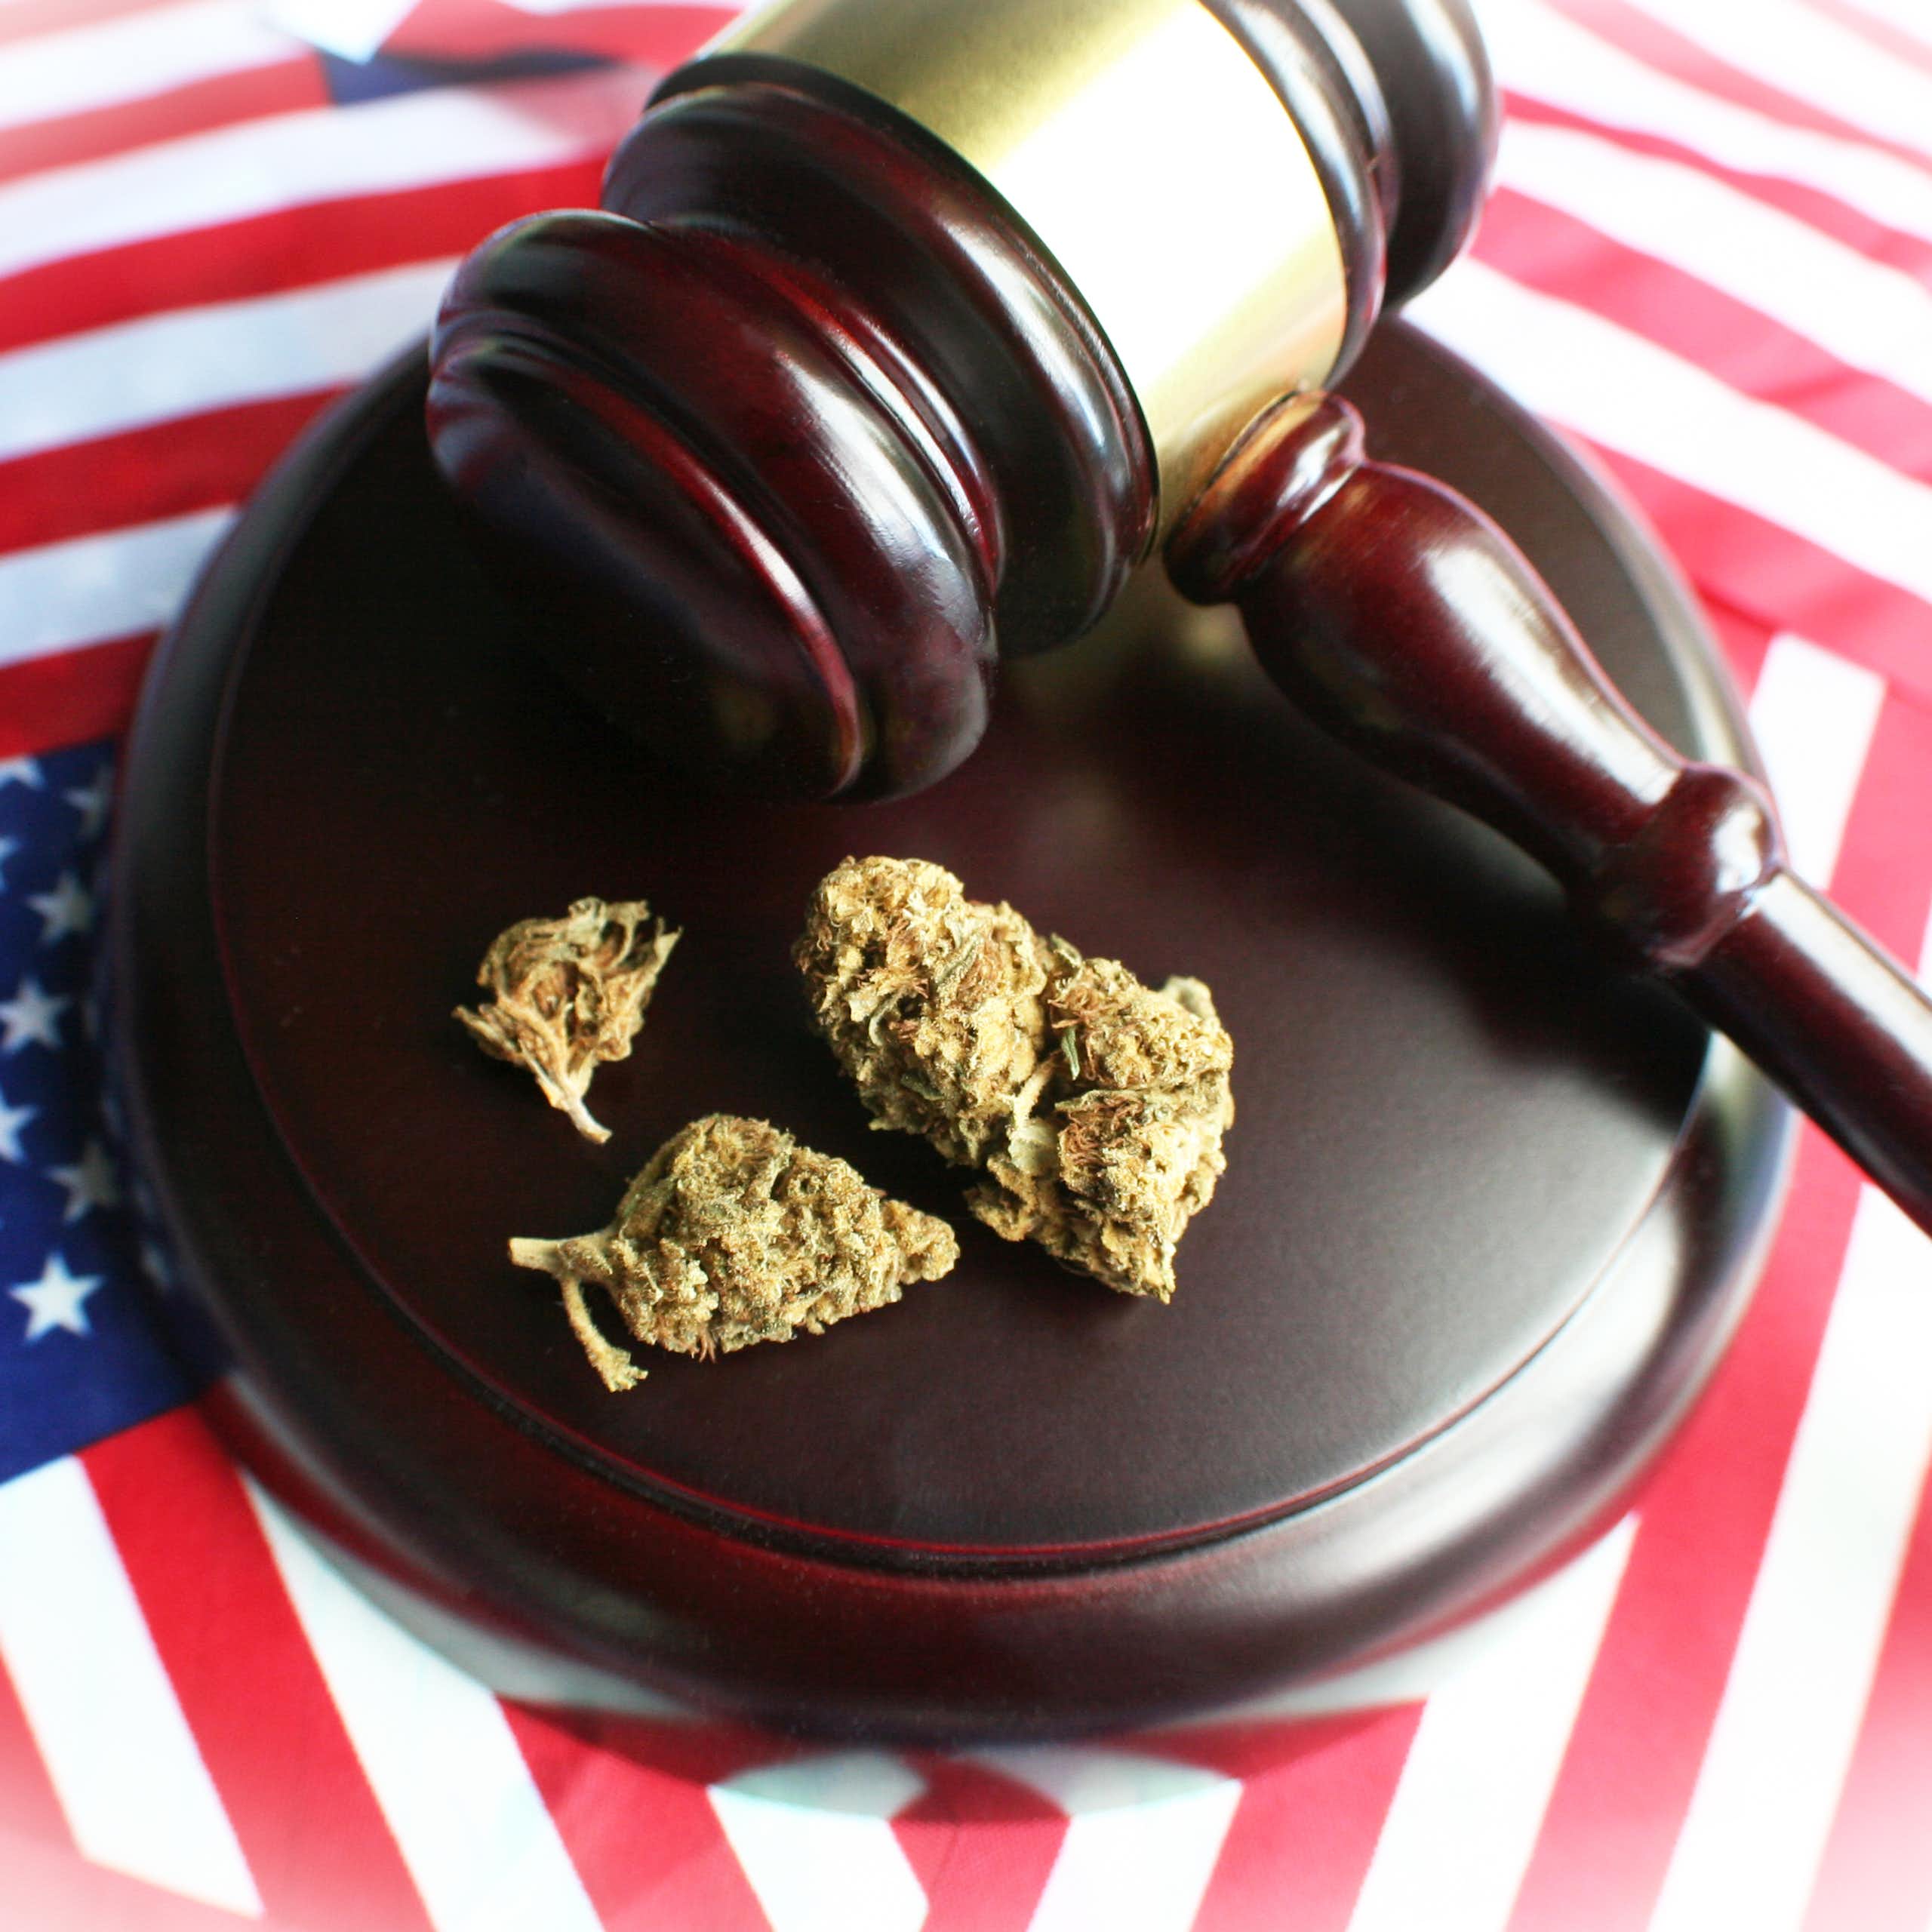 A few buds of marijuana sit on a sound block next to a judge's gavel. American flags are in the background.